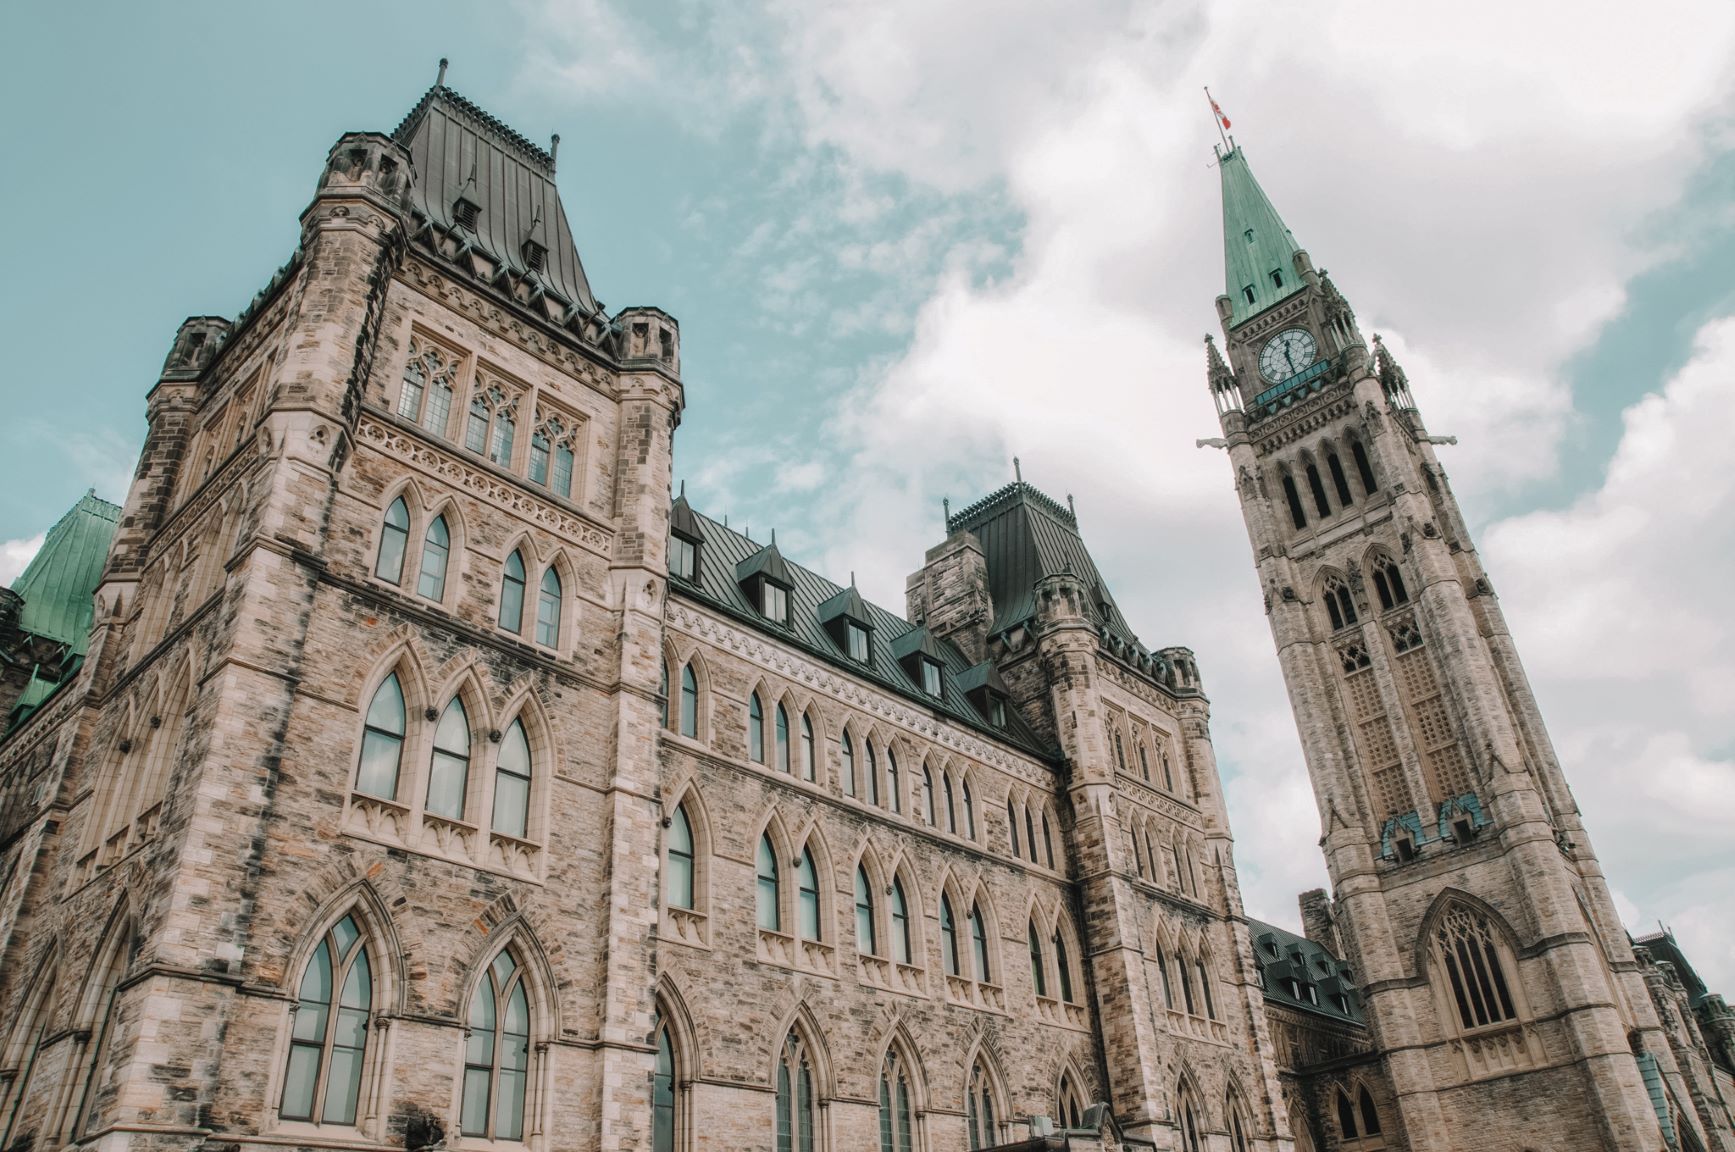 A list of Canada's coolest Capital Cities by Canadian Province includes Victoria, Winnipeg, Toronto, Charlottetown, Fredericktown. And, the capital city of Ottawa for all of Canada.